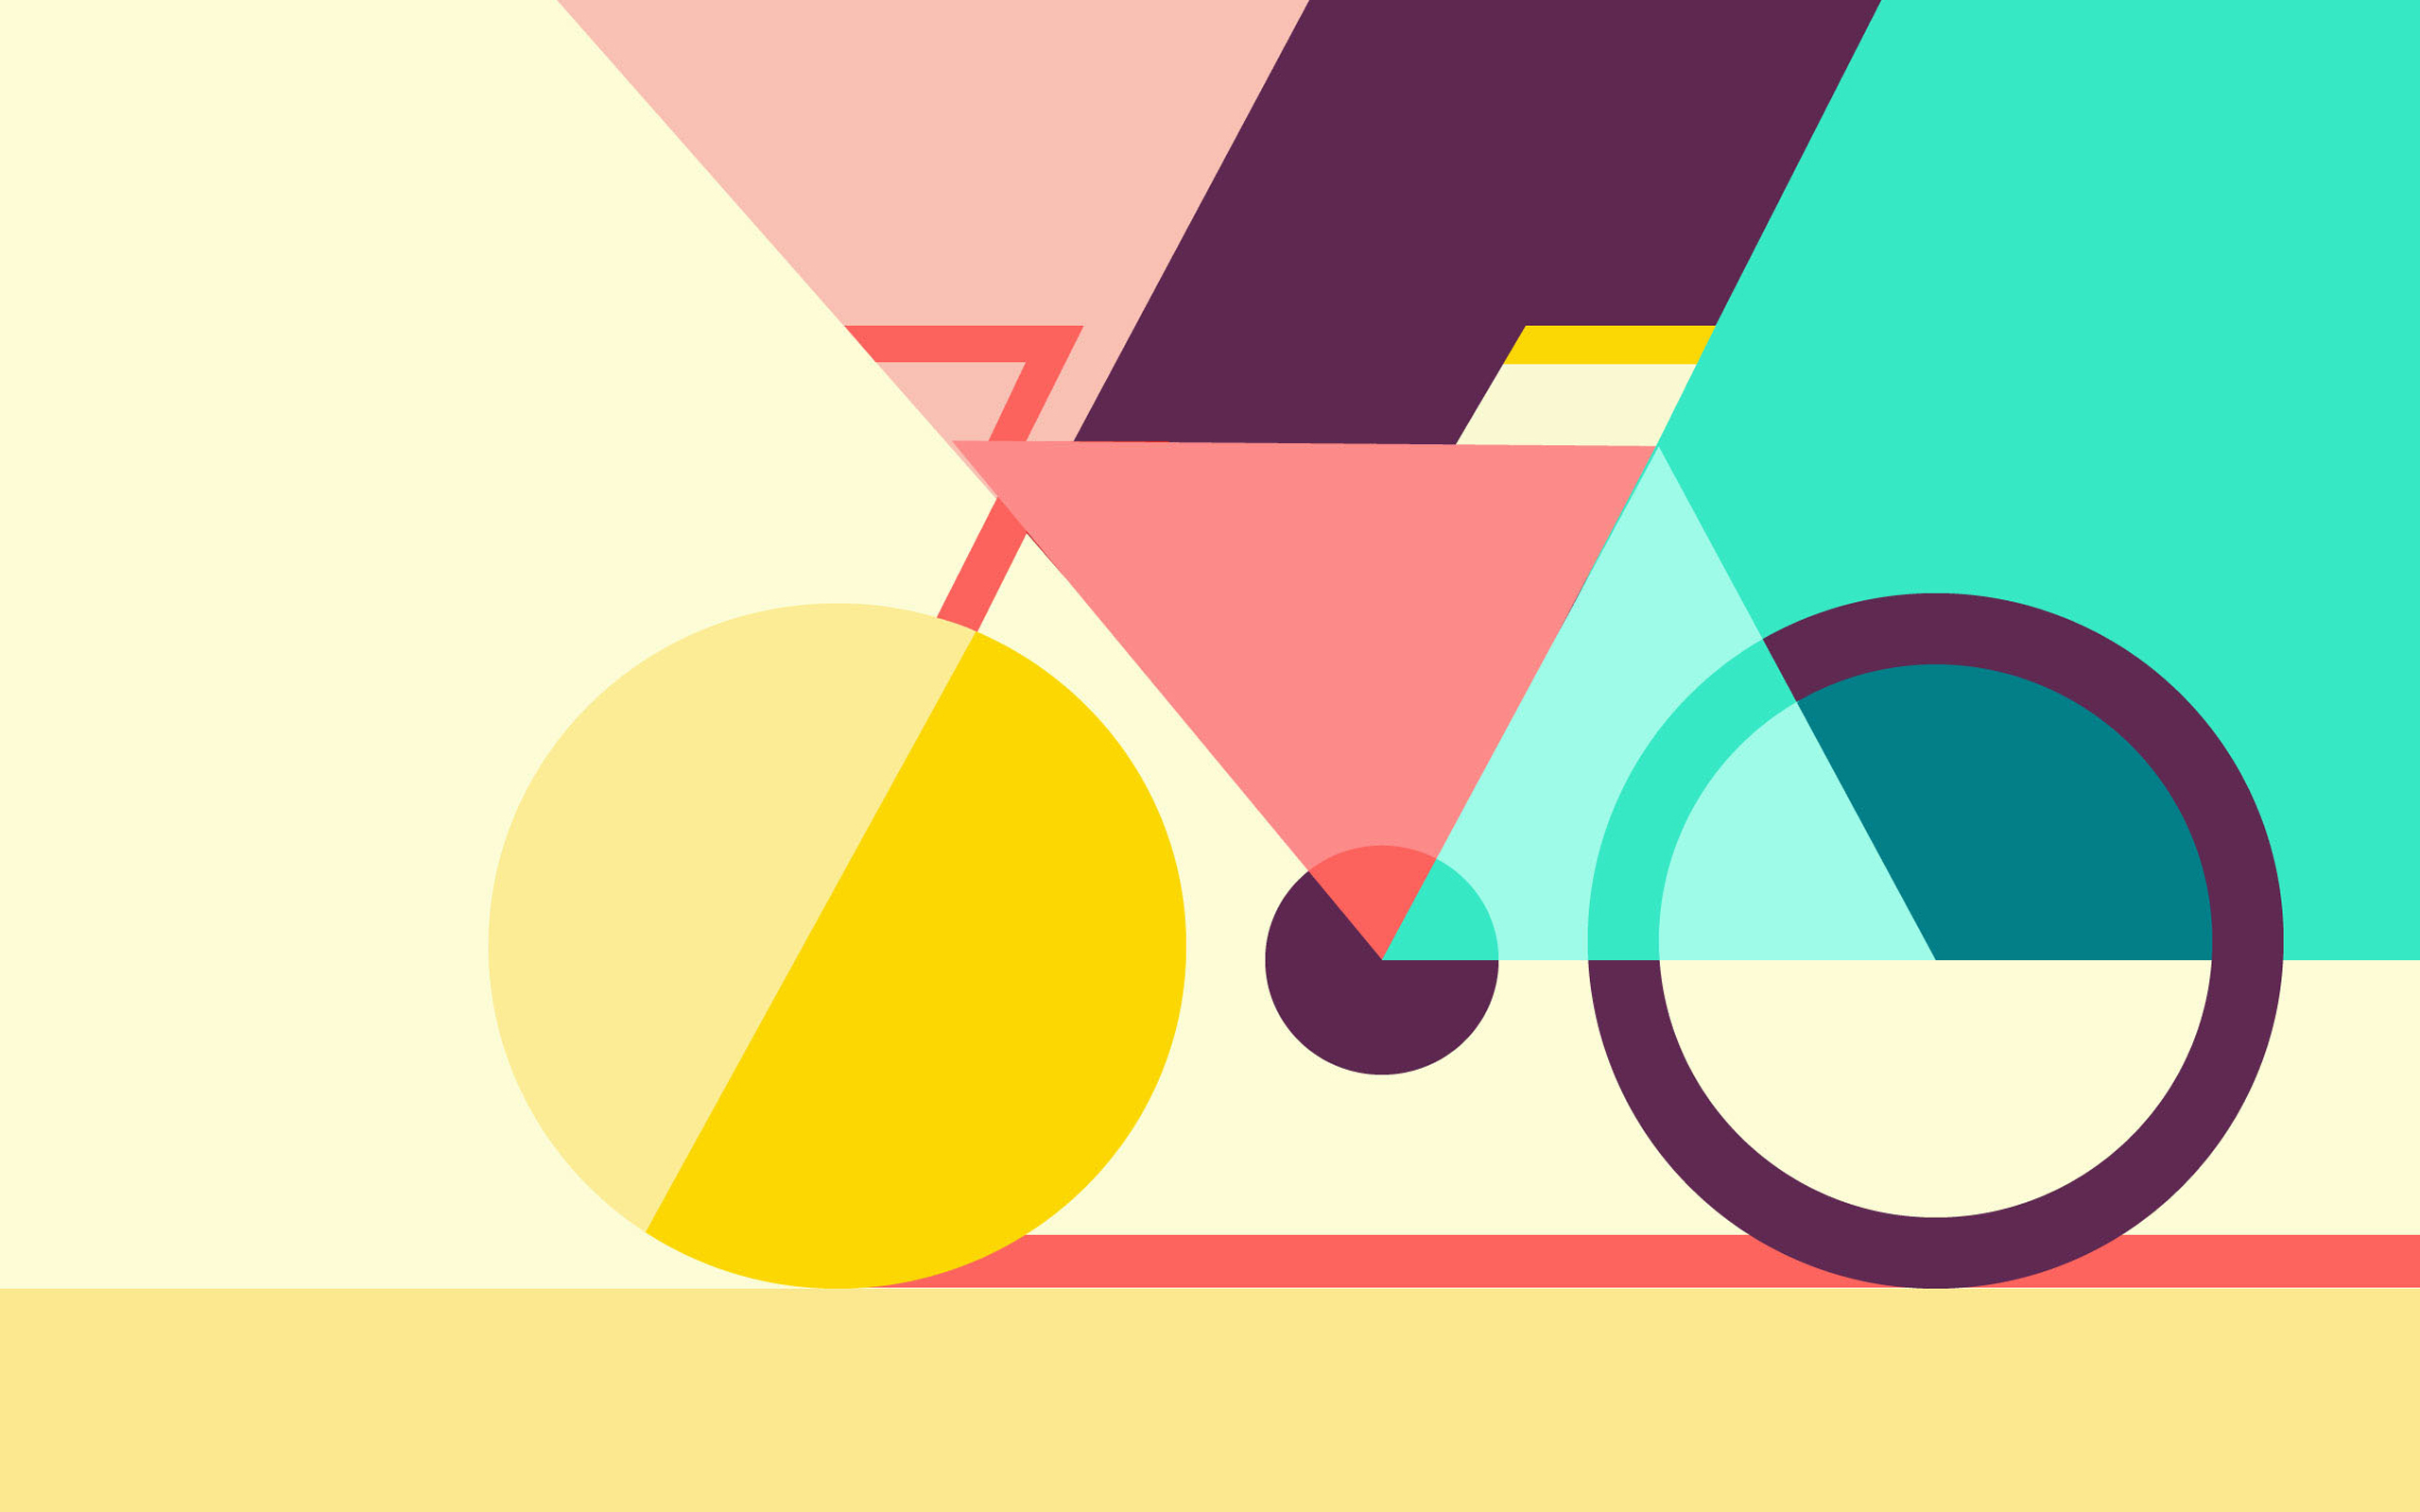 Geometric Abstract Bicycle728653106 - Geometric Abstract Bicycle - Neon, Geometric, Bicycle, abstract